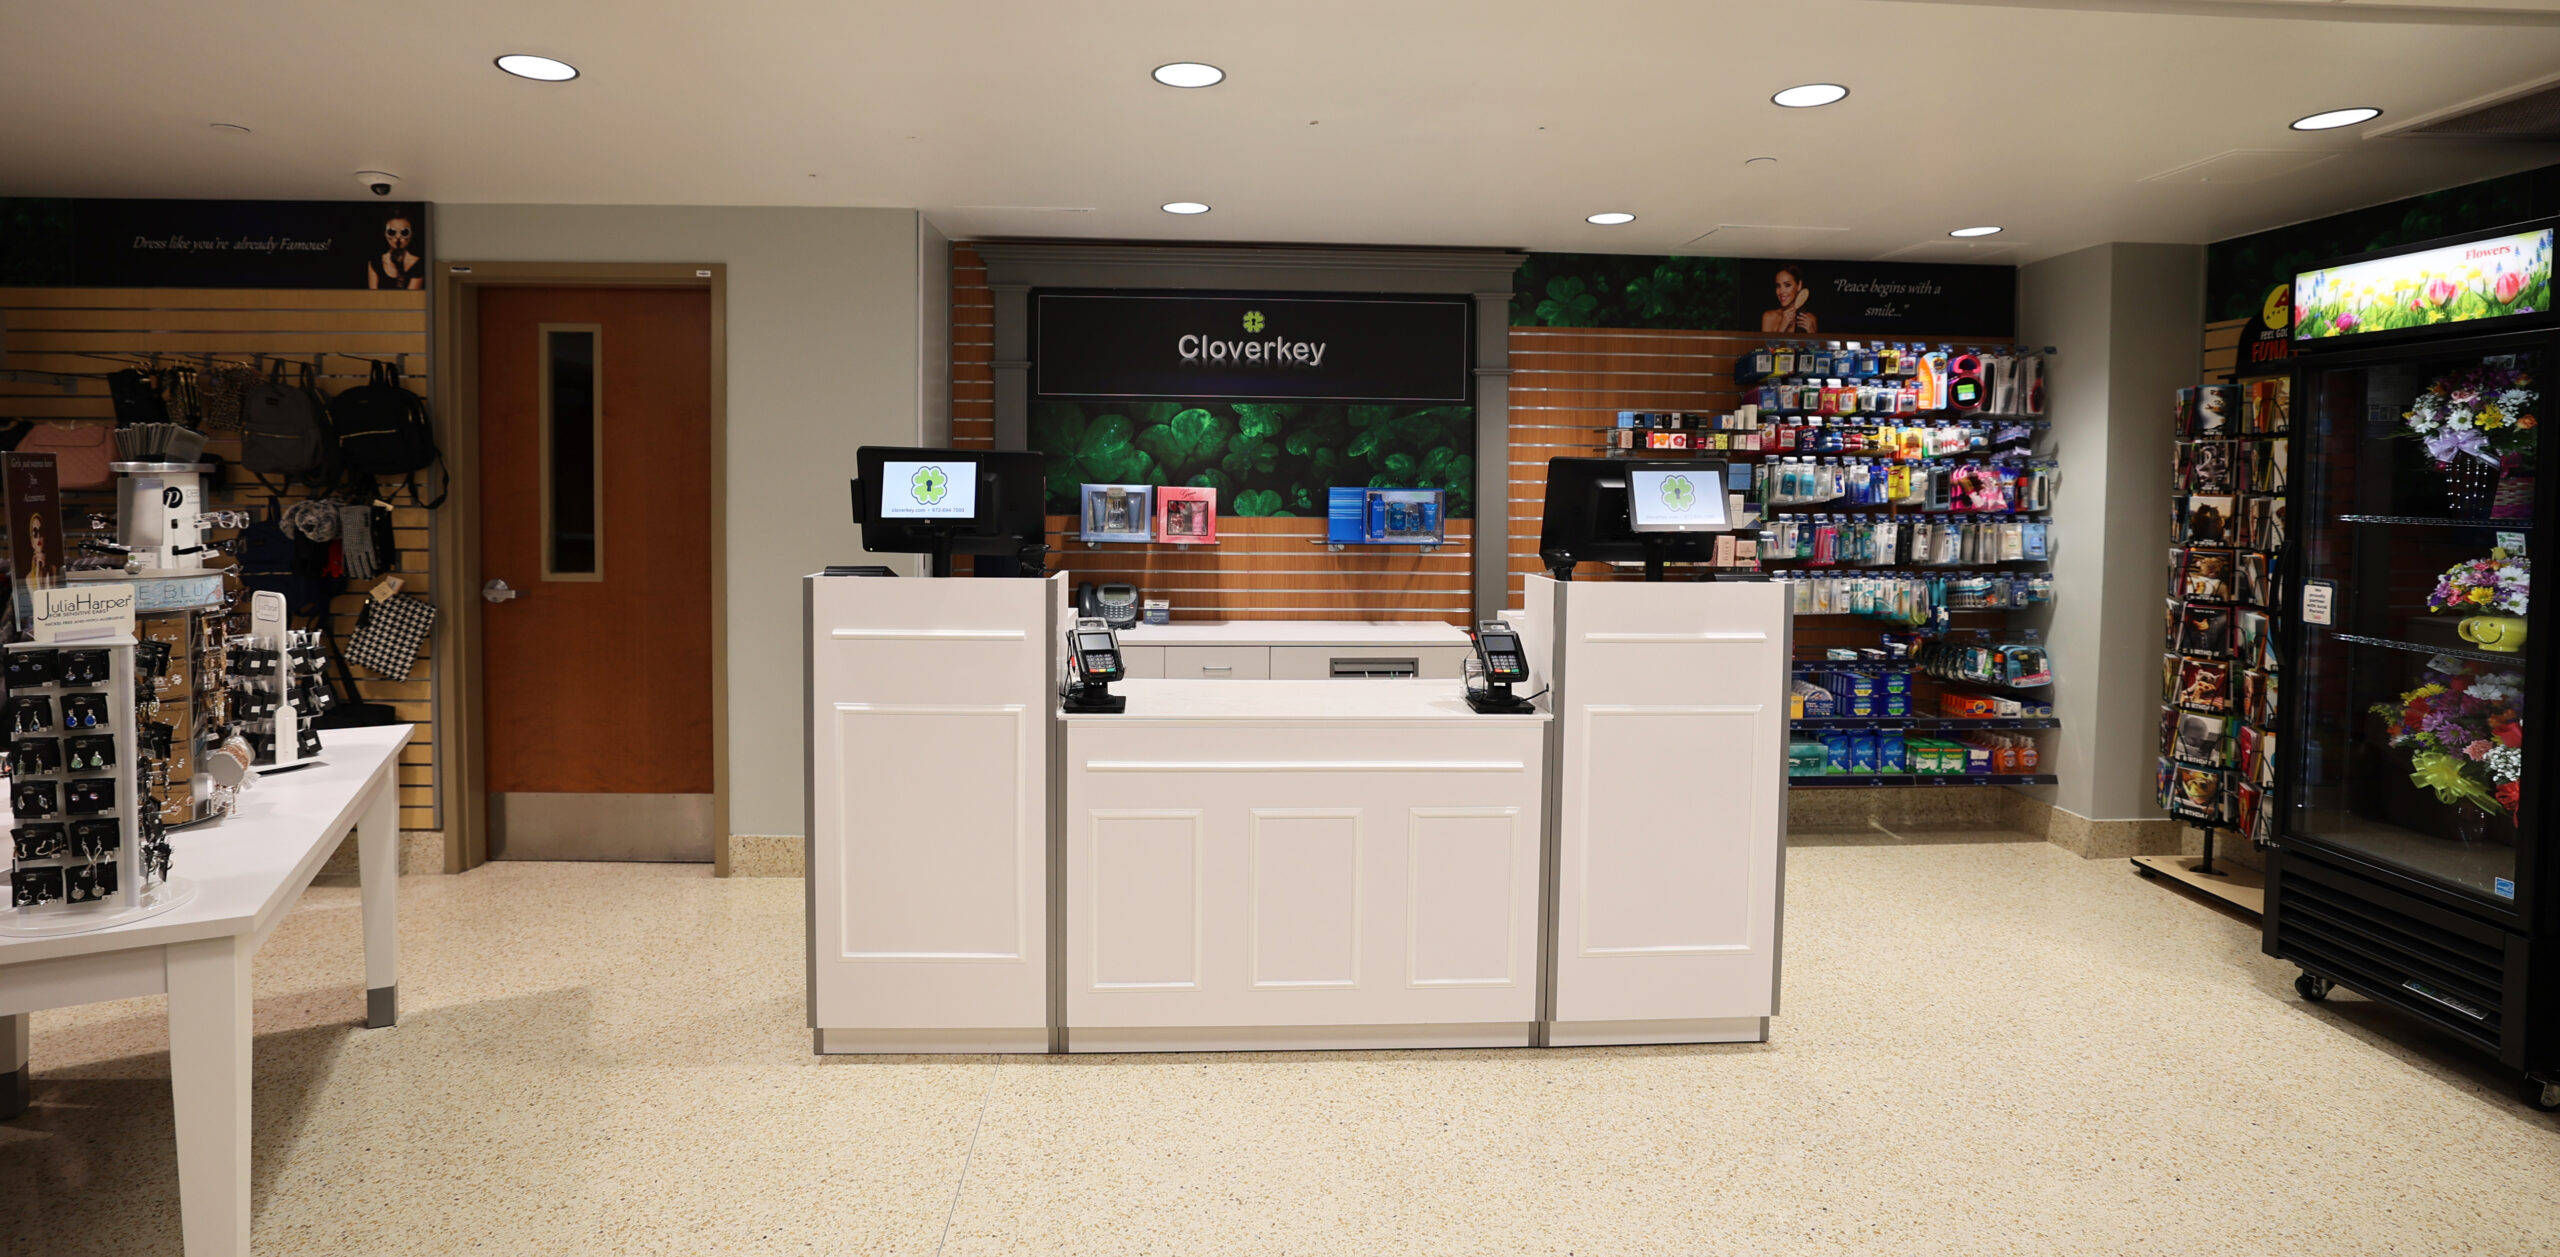 Additional photo of the Hospitals of Providence, Memorial Campus gift shop front desk at different angle